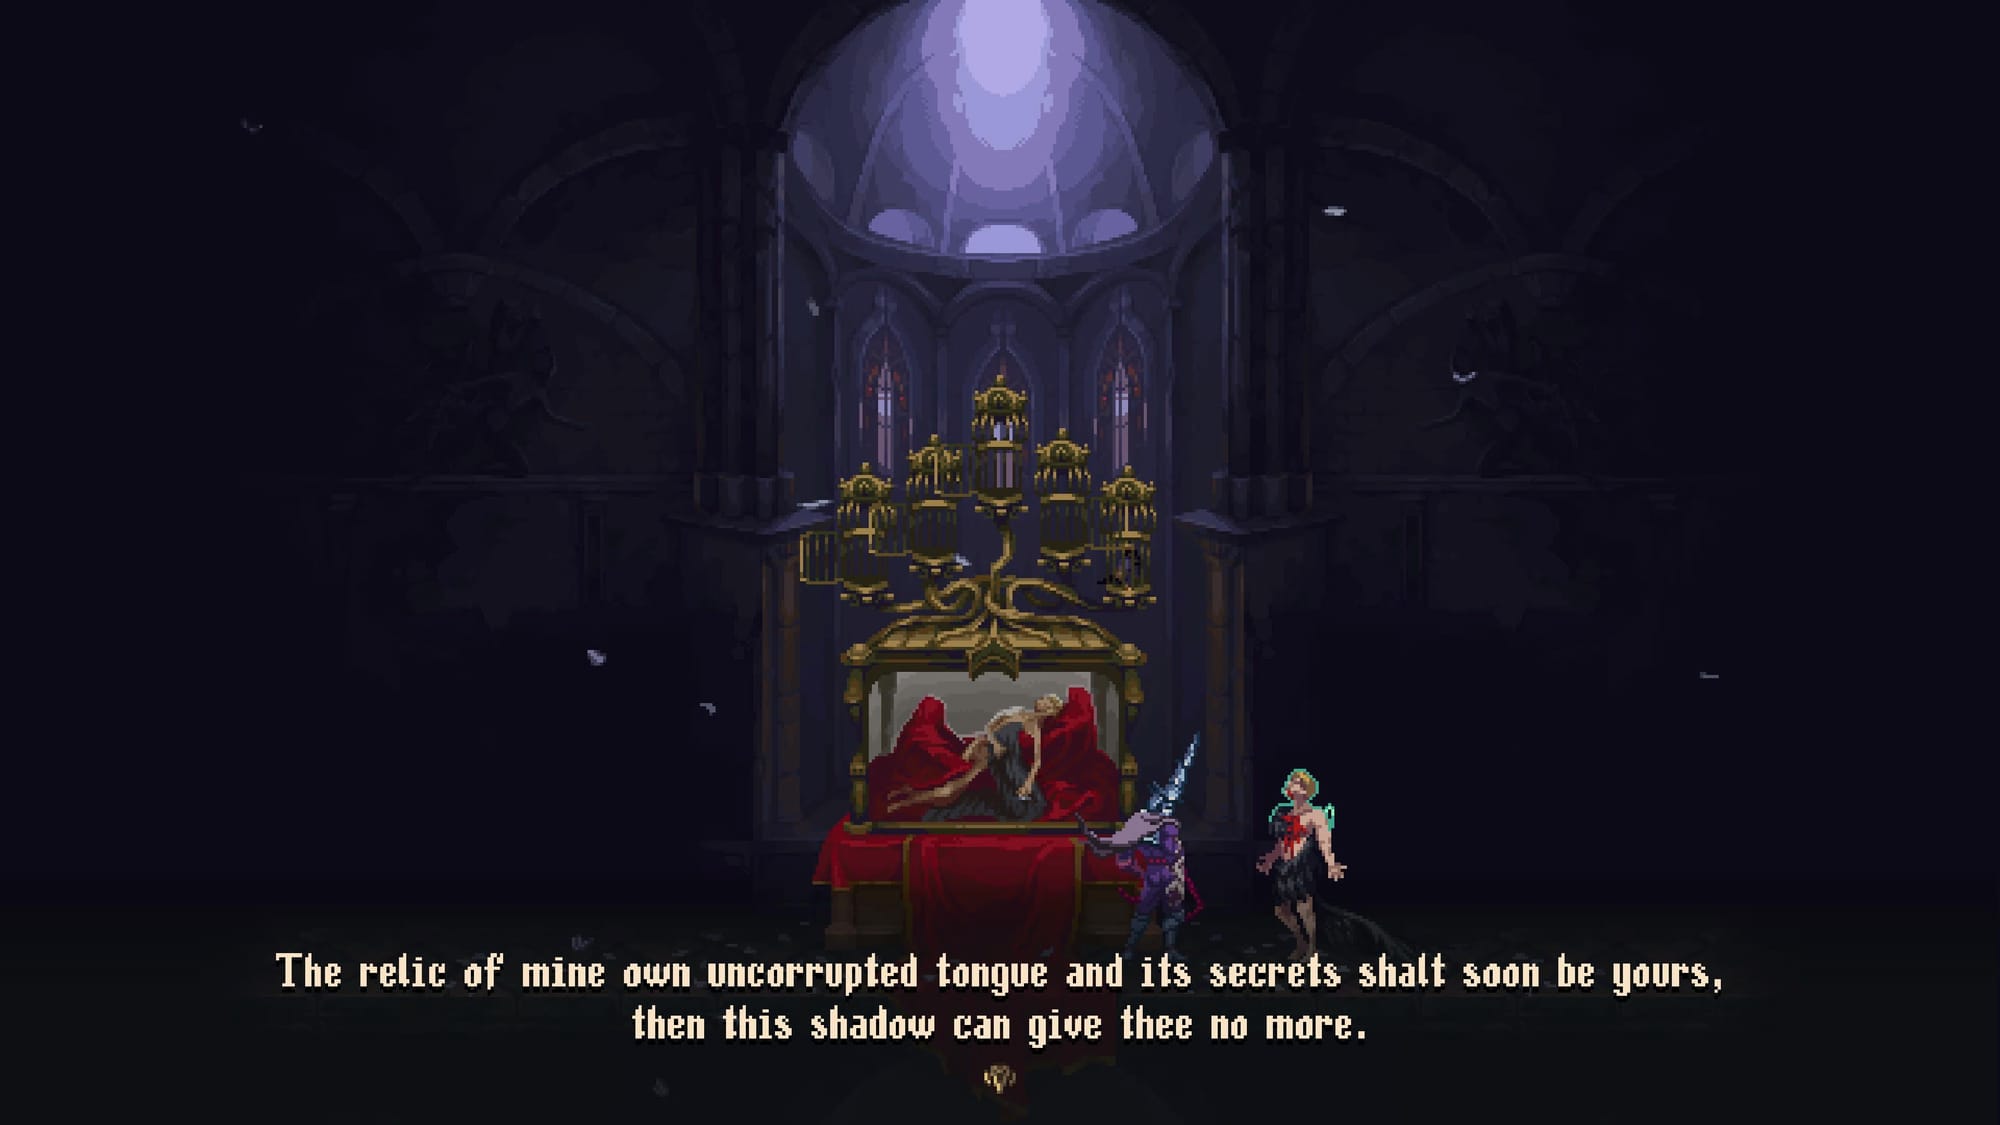 A scene in the cathedral with a golden structure in the center of it and 5 empty bird cages. And angel with a wound in his chest. Subtitles say: "The relic of mine own uncorrupted tongue and uts secrets shaft soon be yours, then this shadow can give thee no more."